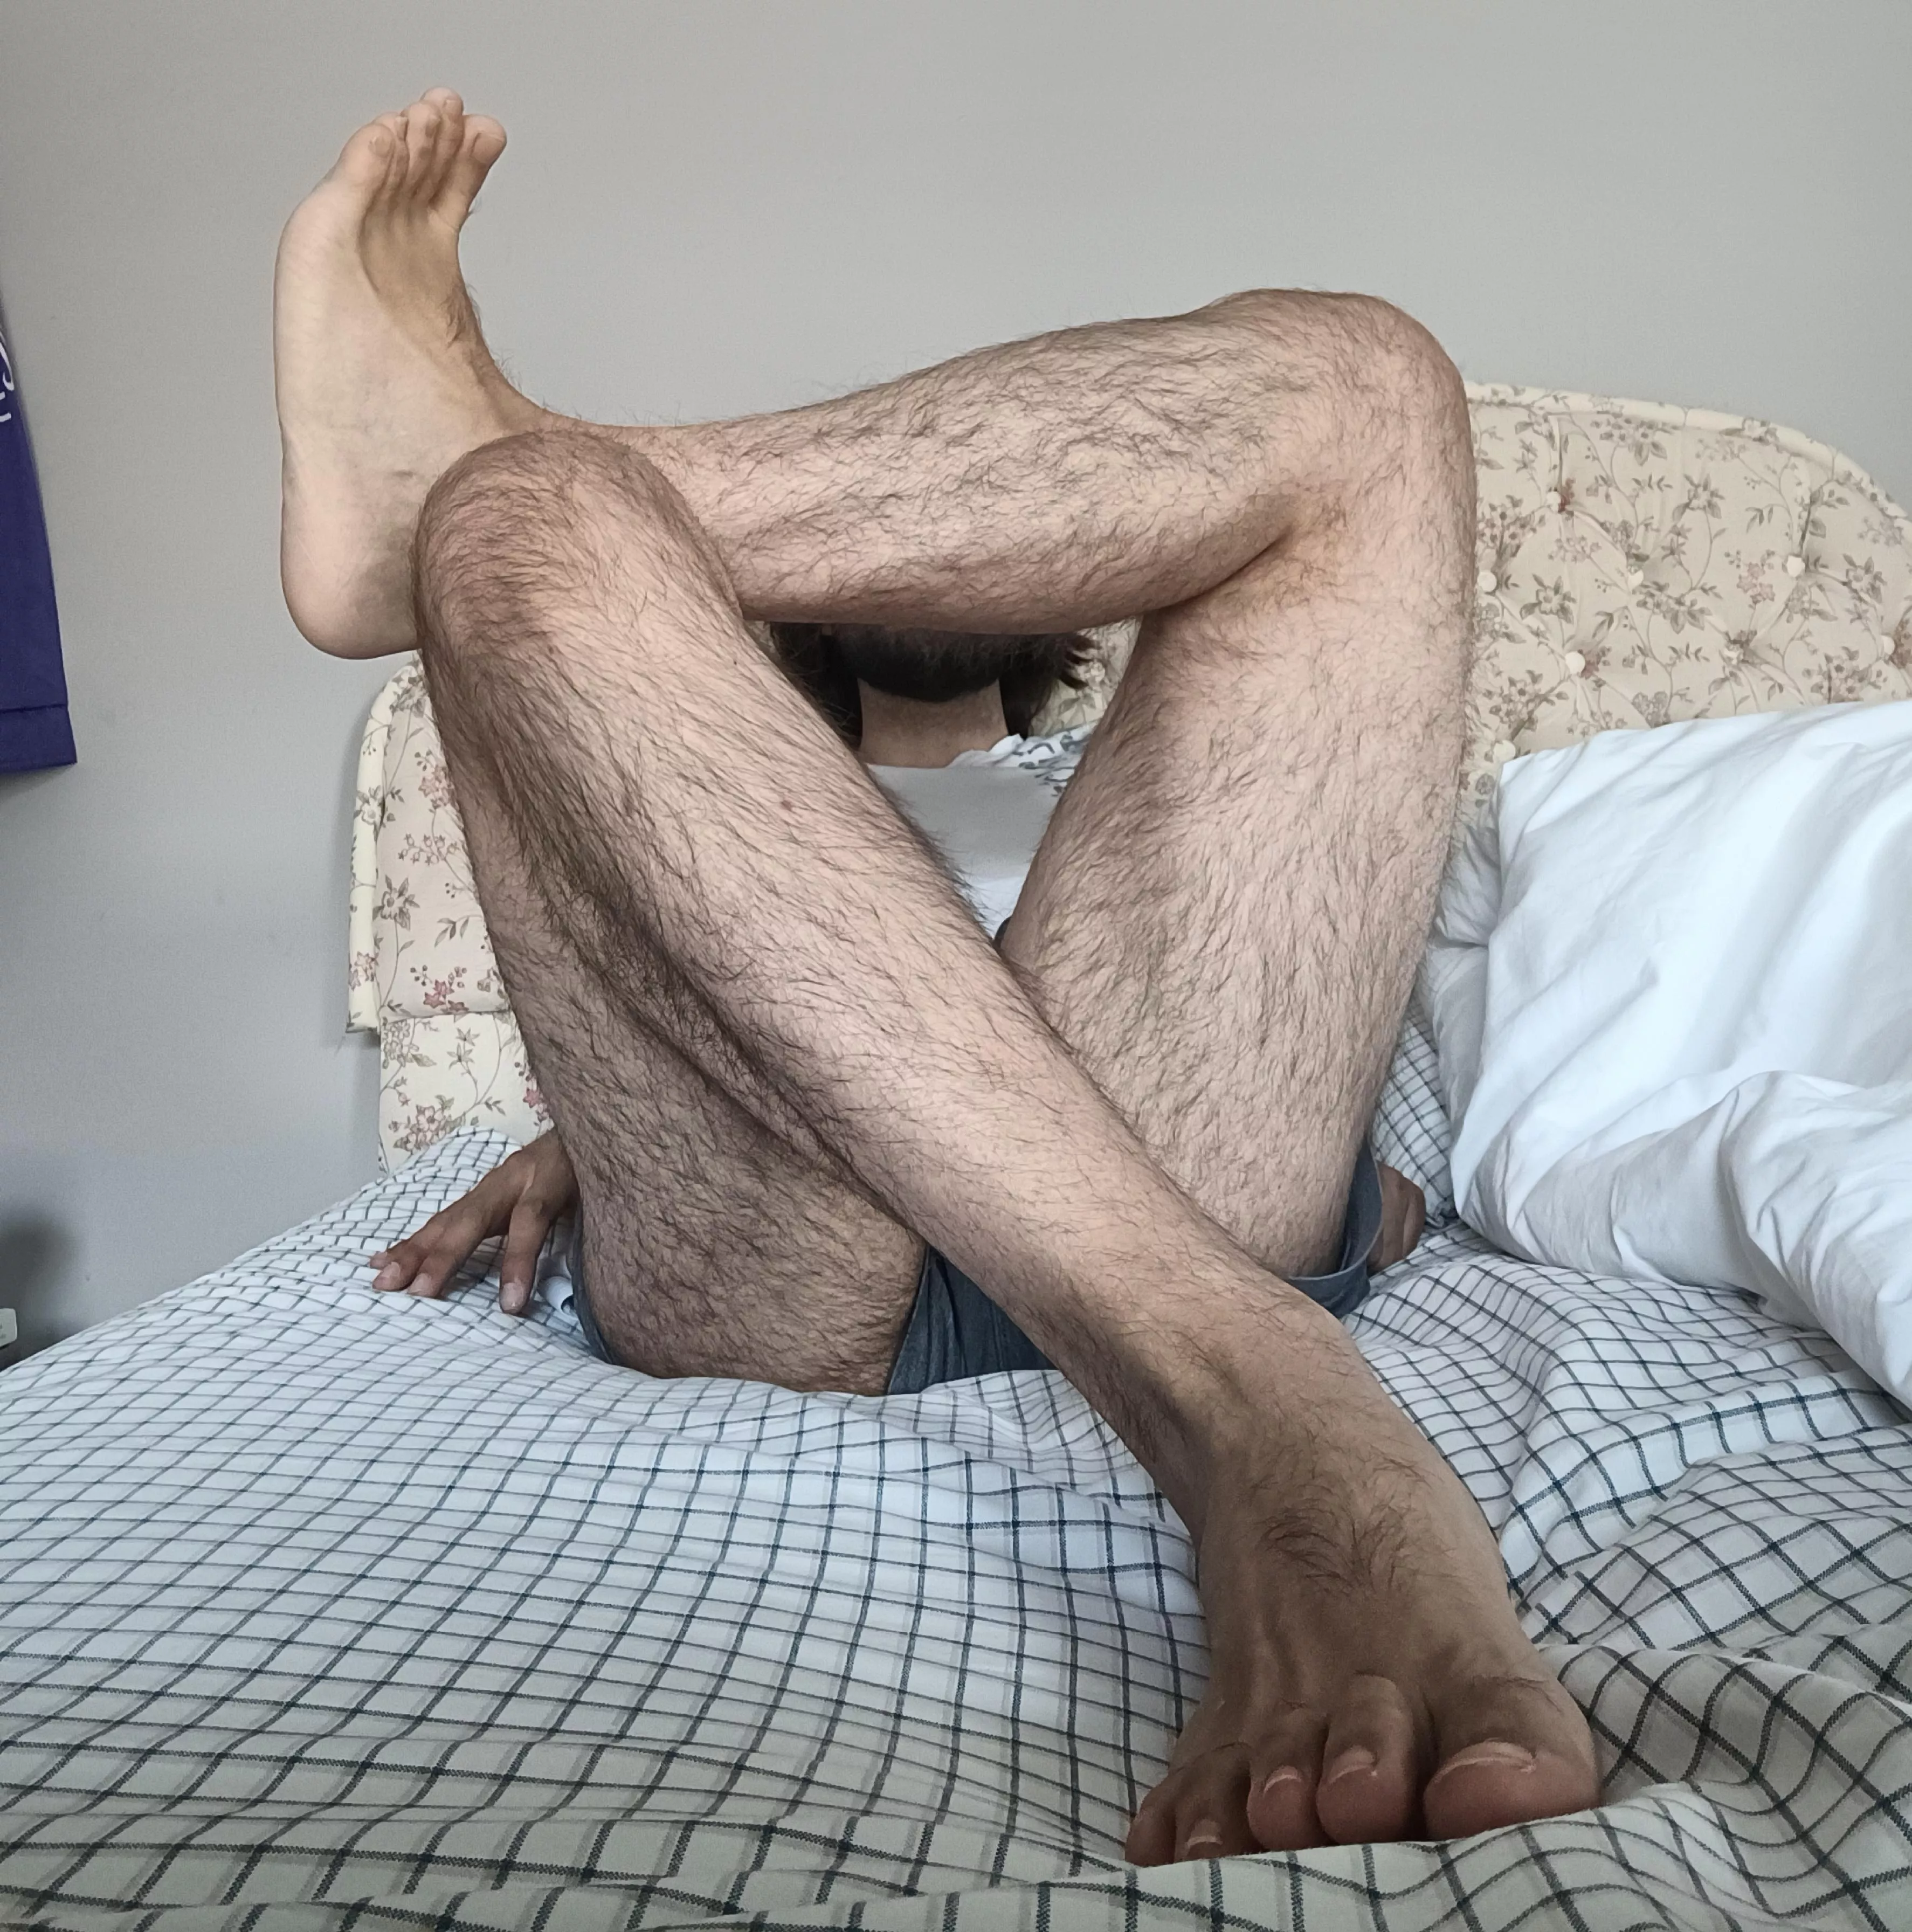 Where My Men With Hairy Legs At Nudes By Lat Eu Tech